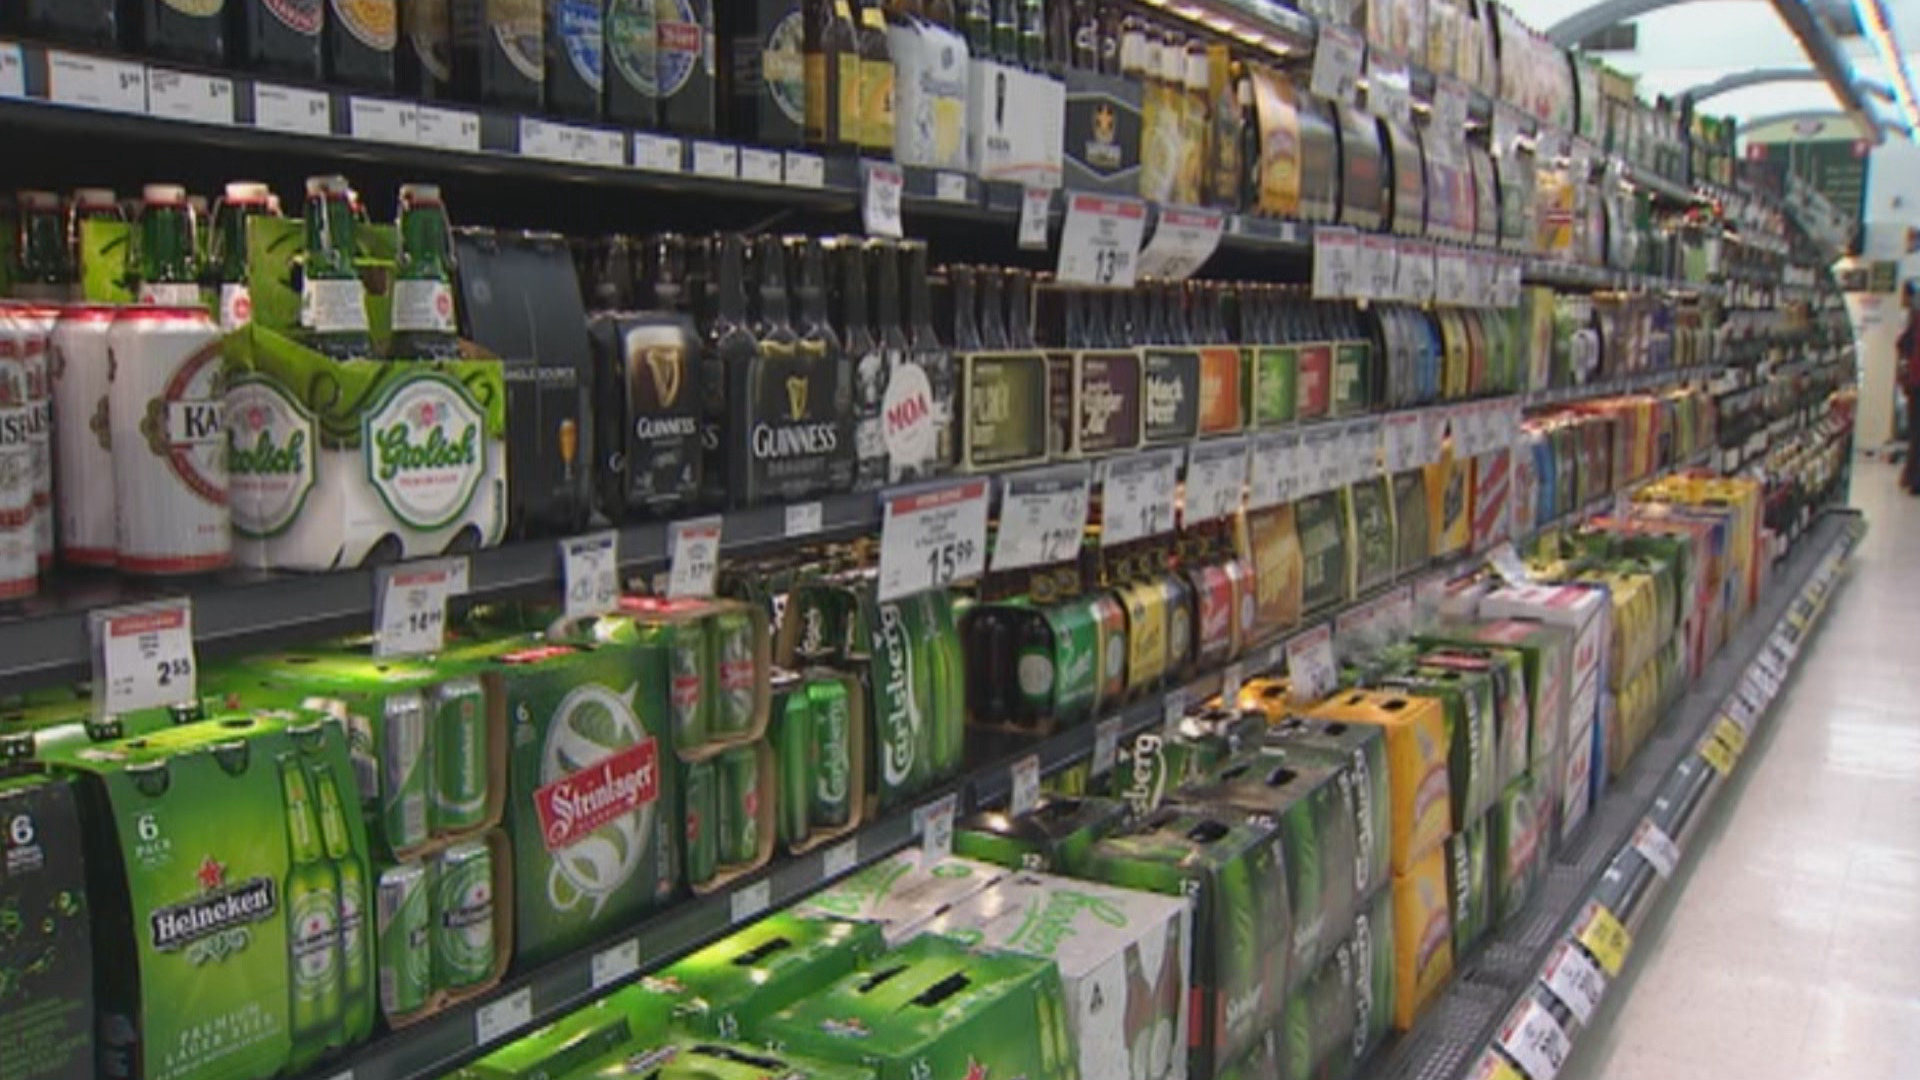 Kiwis likely to pay more for beer after tax increase, brewers warn